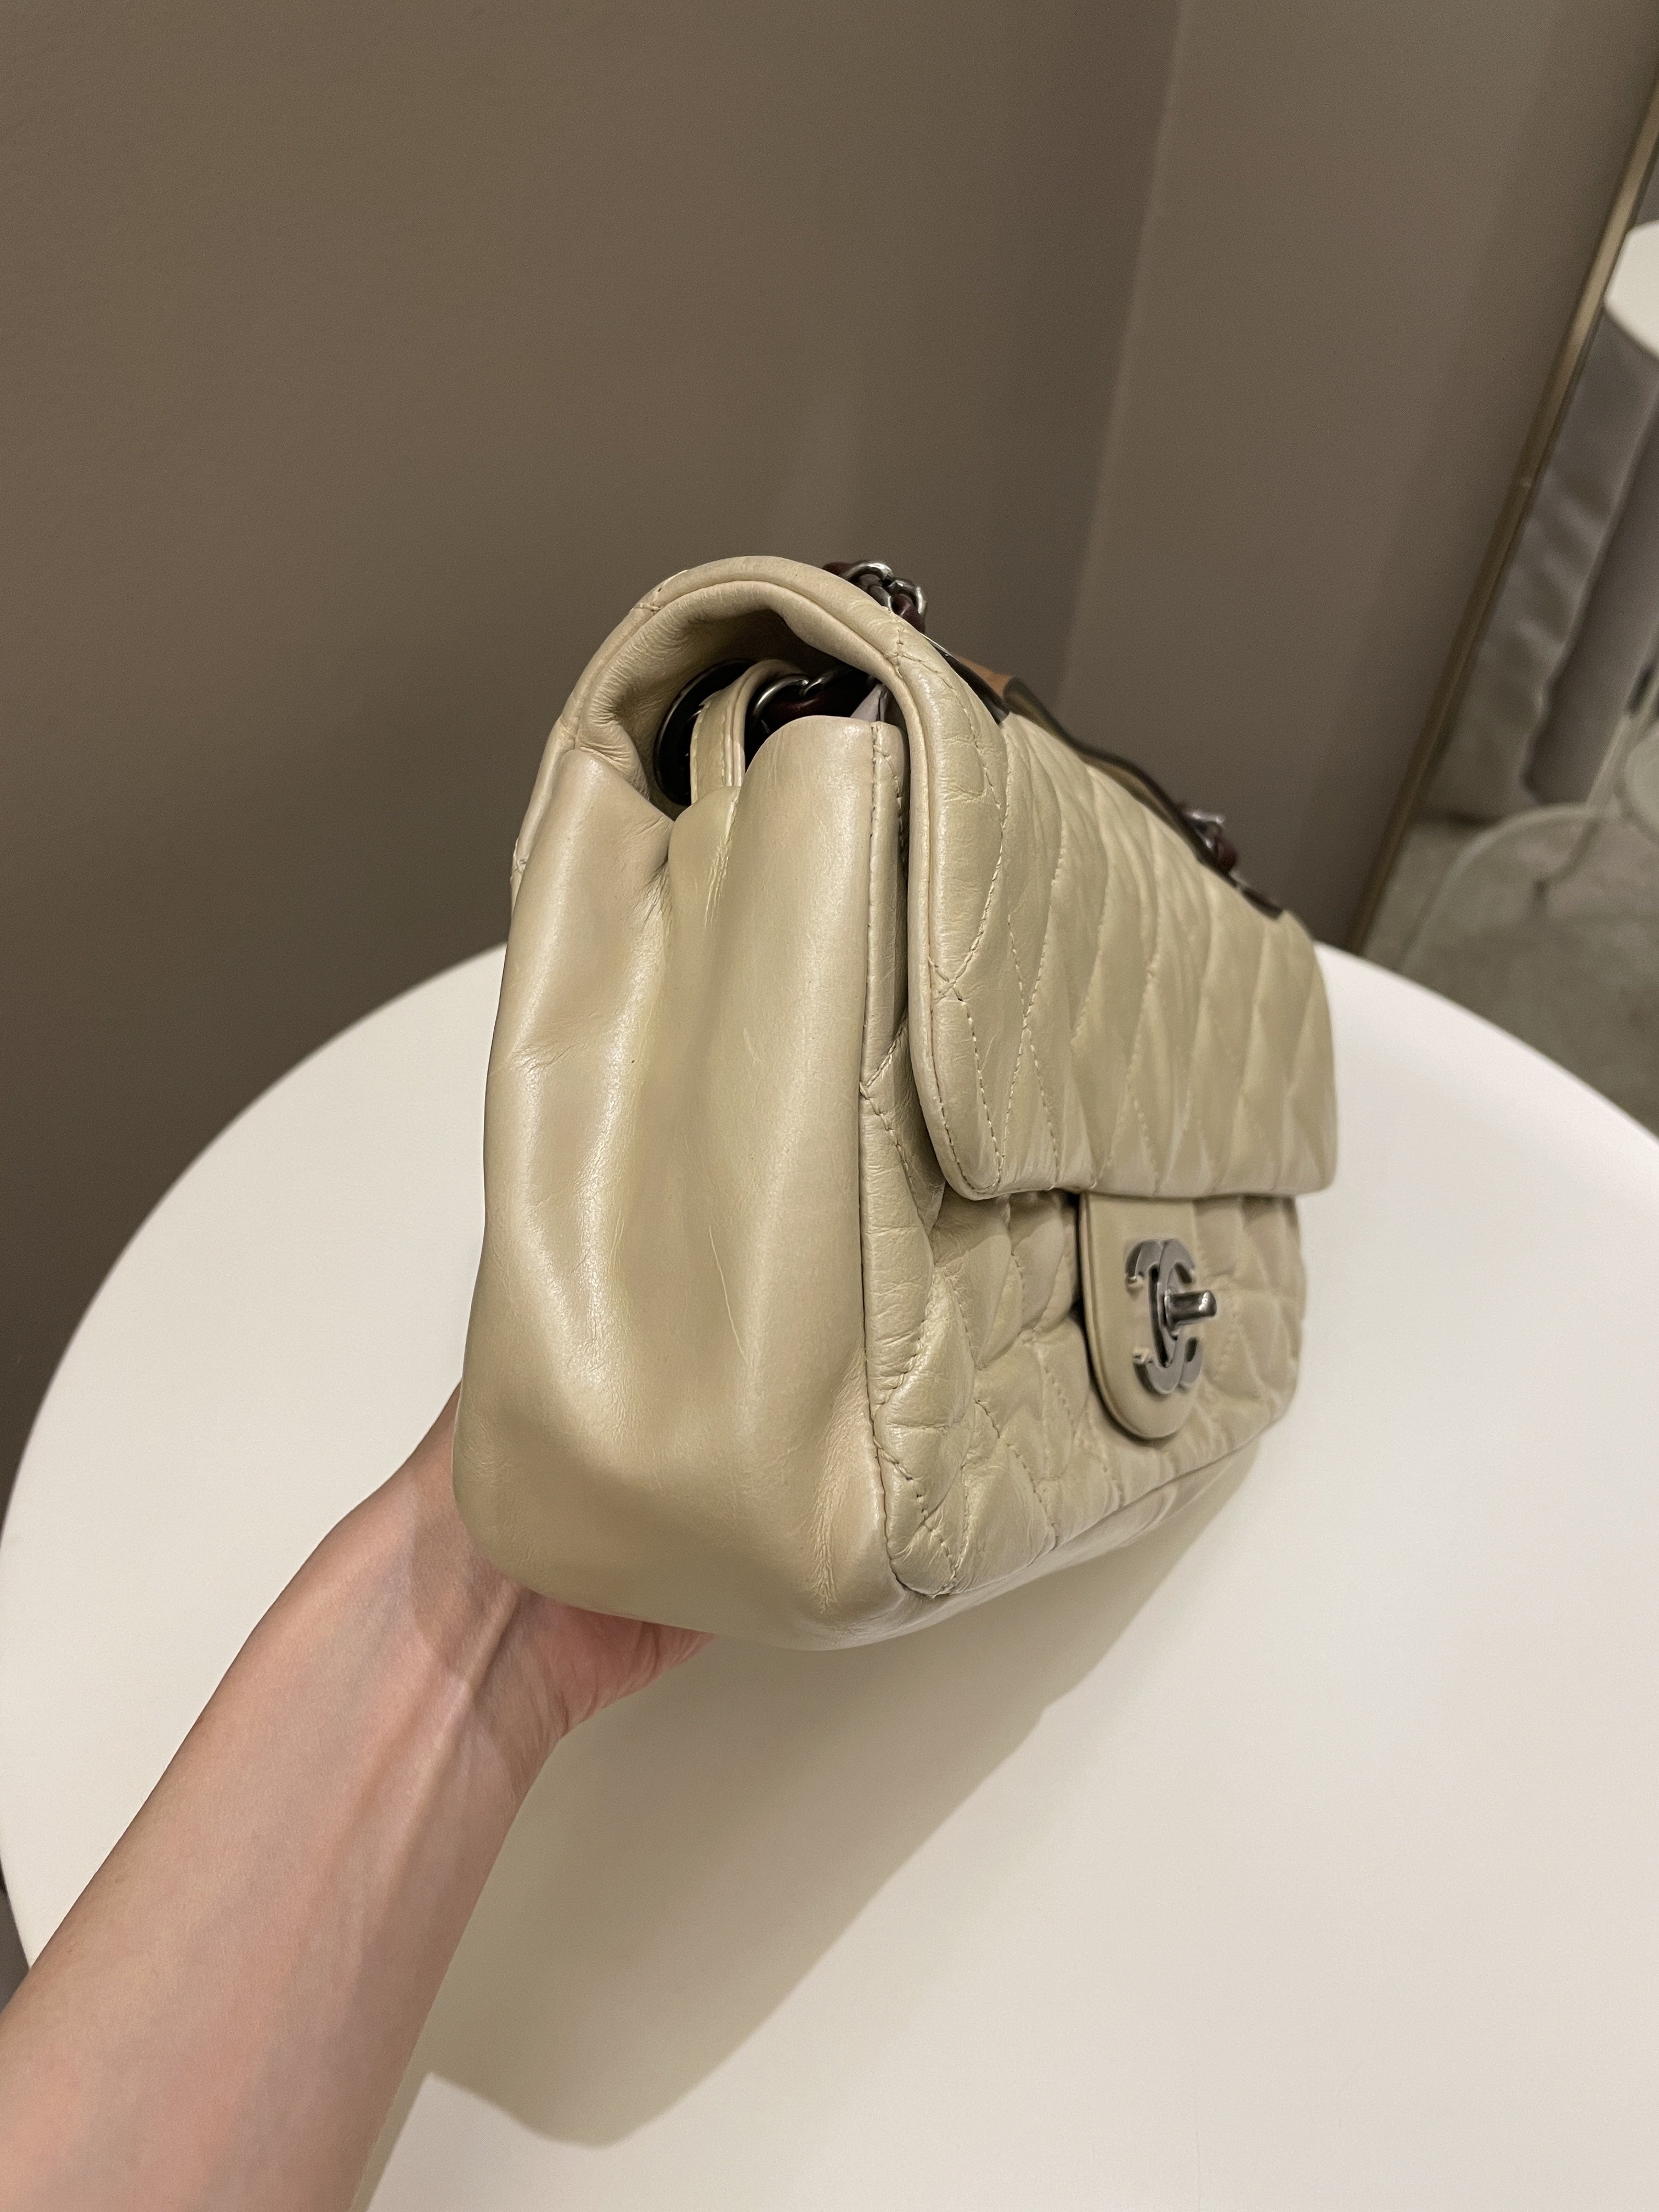 Chanel Quilted Handle Flap Bag Beige Calfskin